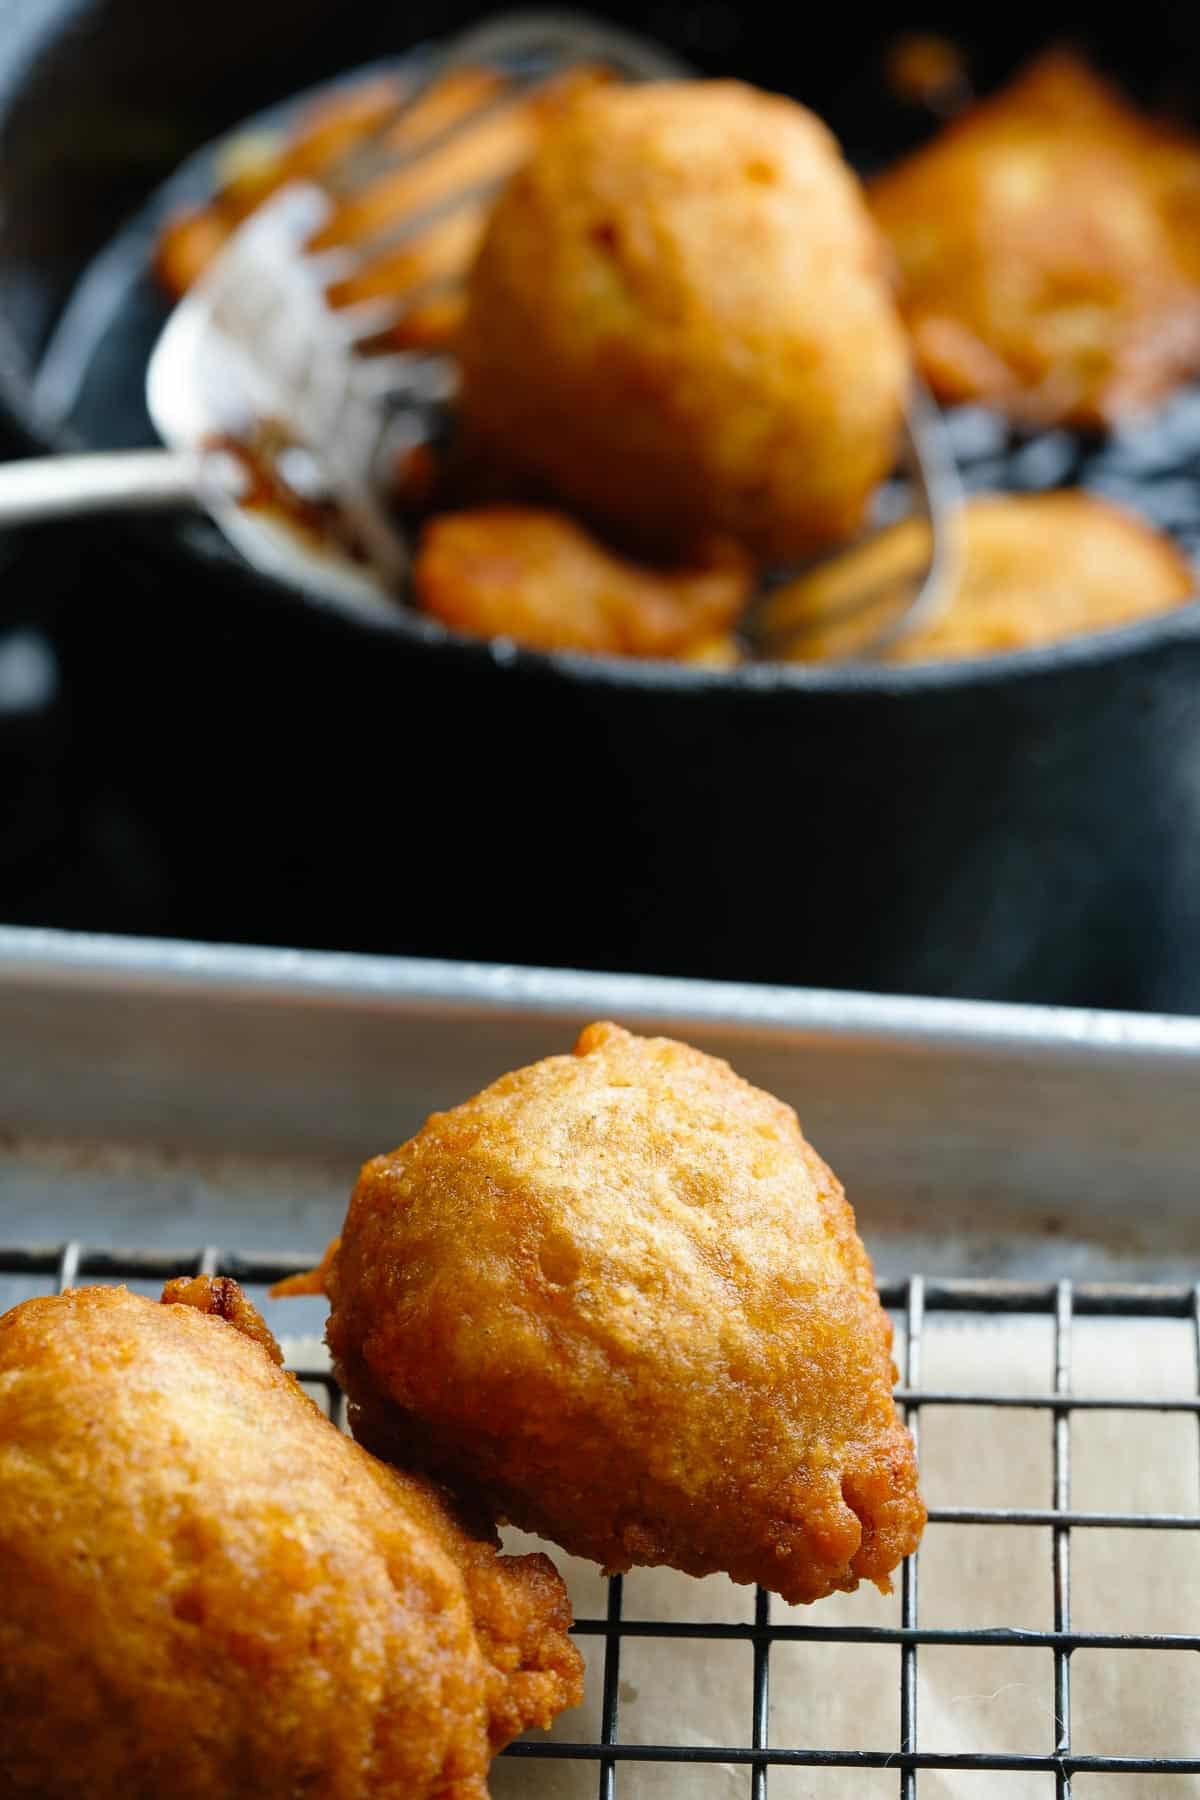 Fried banana doughnuts cooling on a wire rack next to a pan that has more cooking in it.